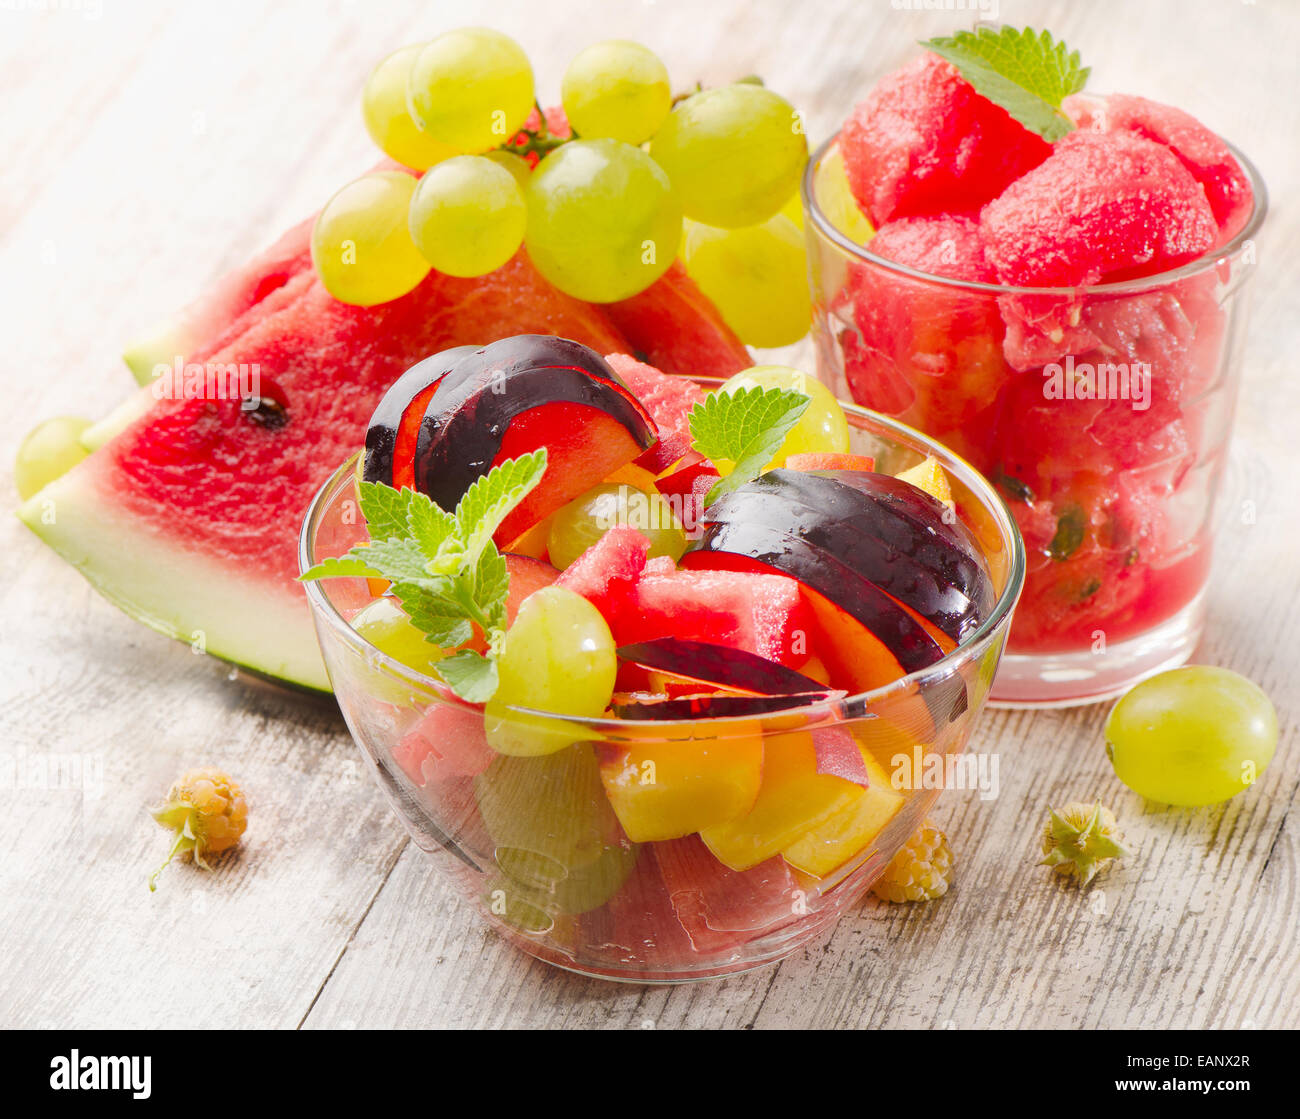 Fruit salad on wooden table. Selective focus Stock Photo